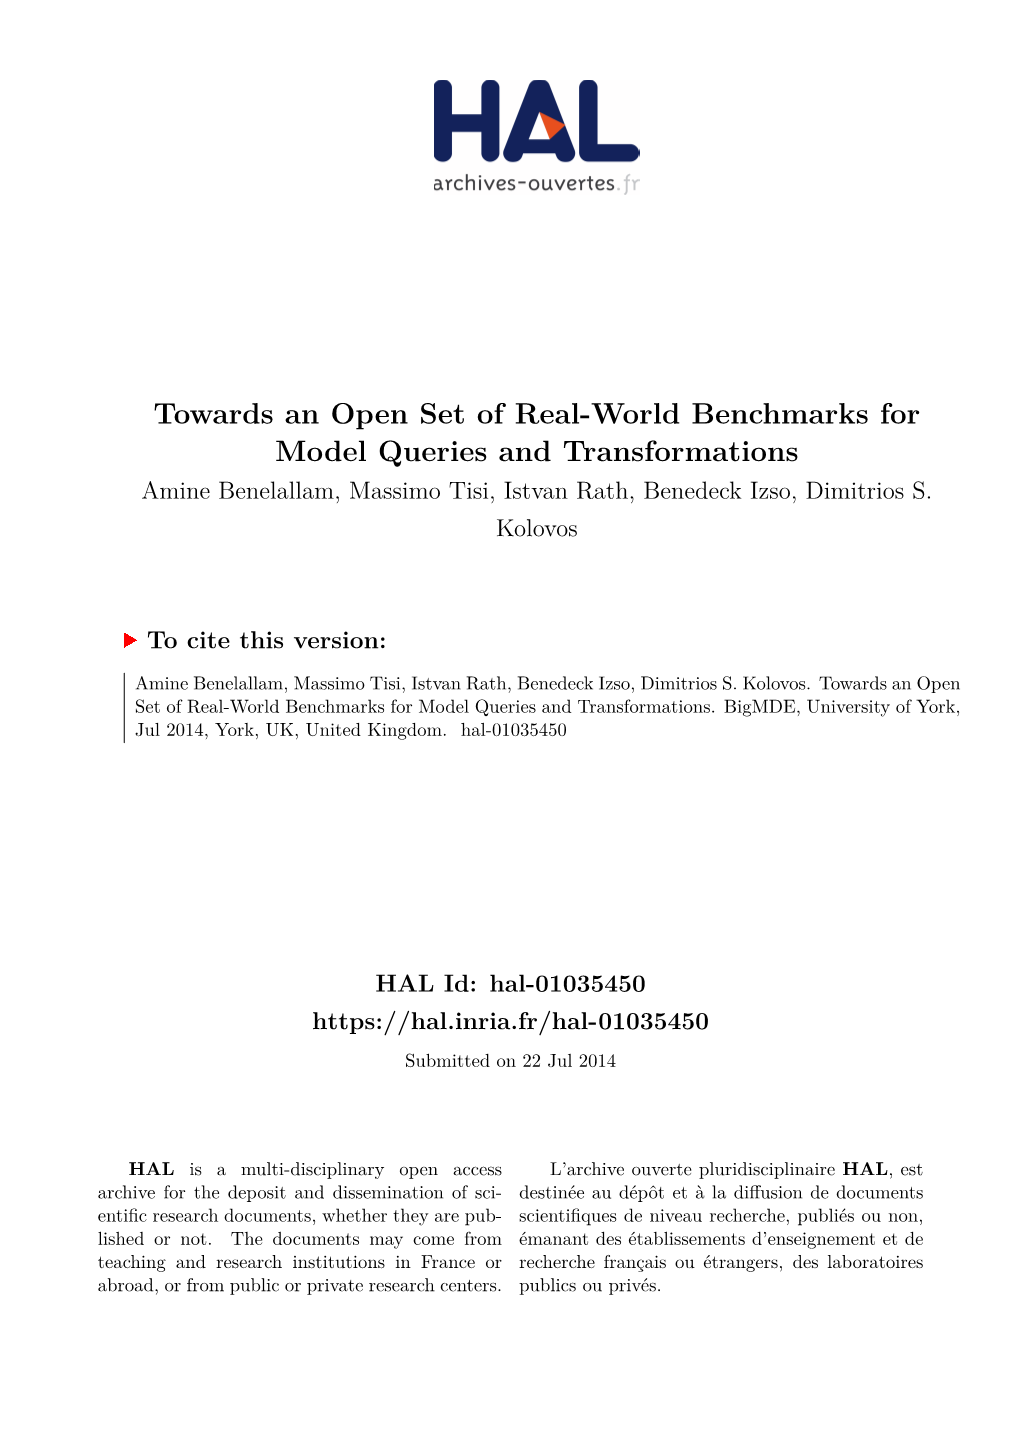 Towards an Open Set of Real-World Benchmarks for Model Queries and Transformations Amine Benelallam, Massimo Tisi, Istvan Rath, Benedeck Izso, Dimitrios S